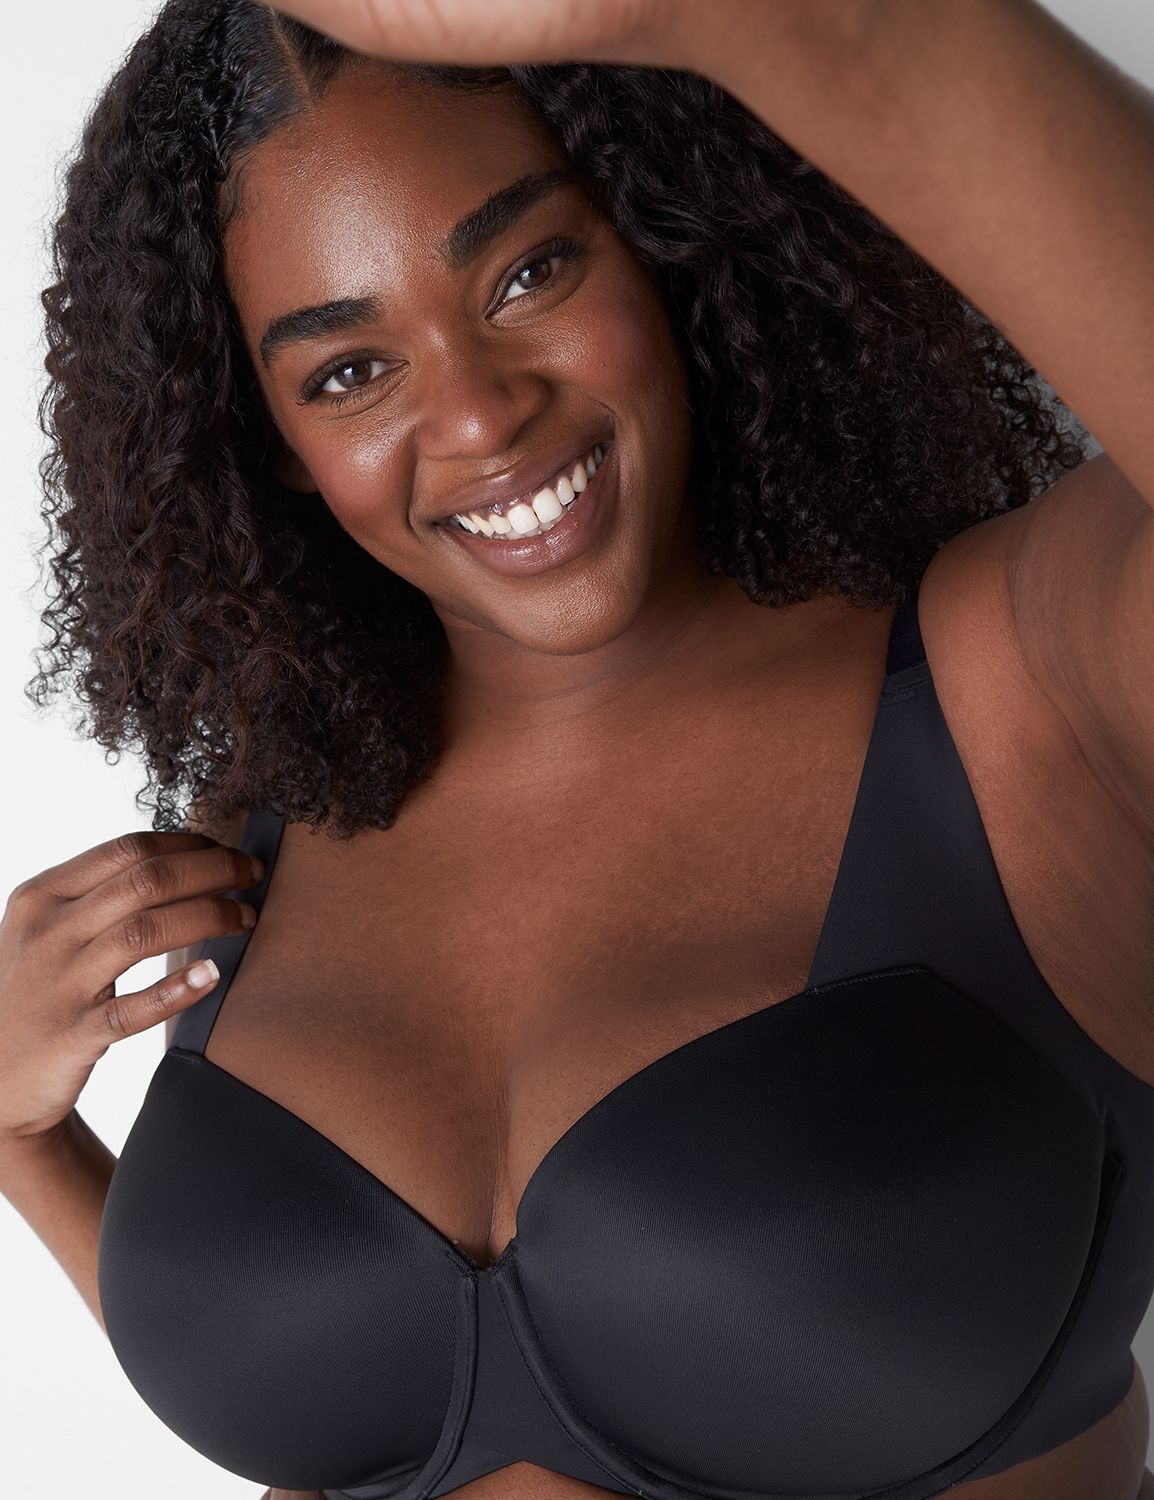 I just got a win on a whim. I found this 36G Cacique balconette at Lane  Bryant. I am so grateful that they don't judge. The manager told me that  we sell